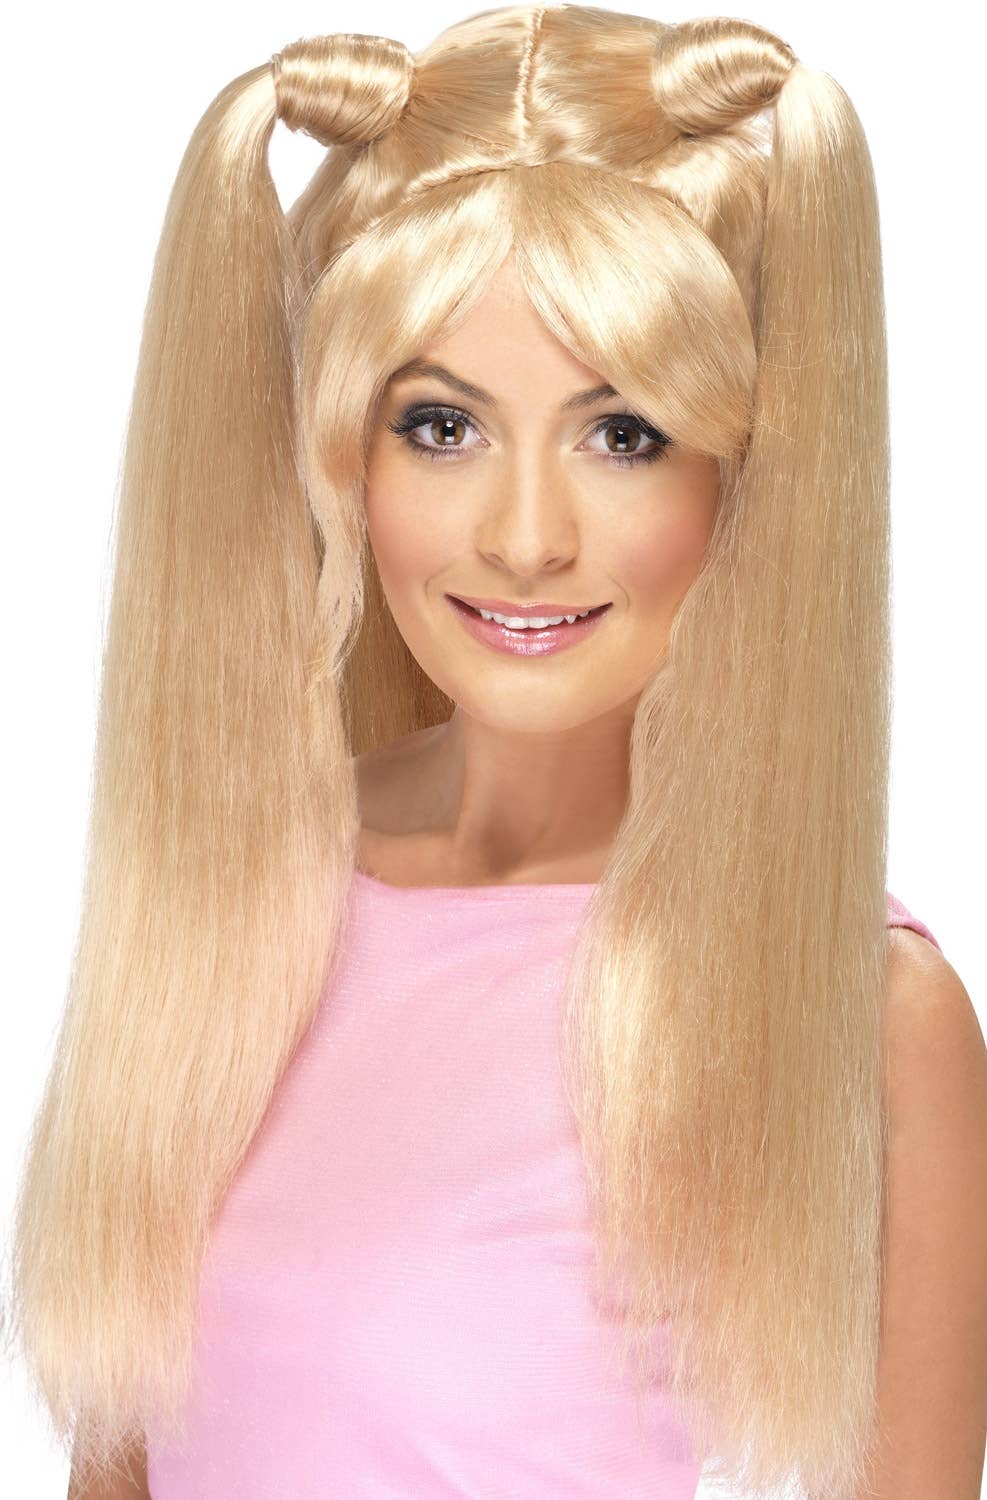 Long Blond Piggy Tales Baby Spice Dress Up Costume Wig